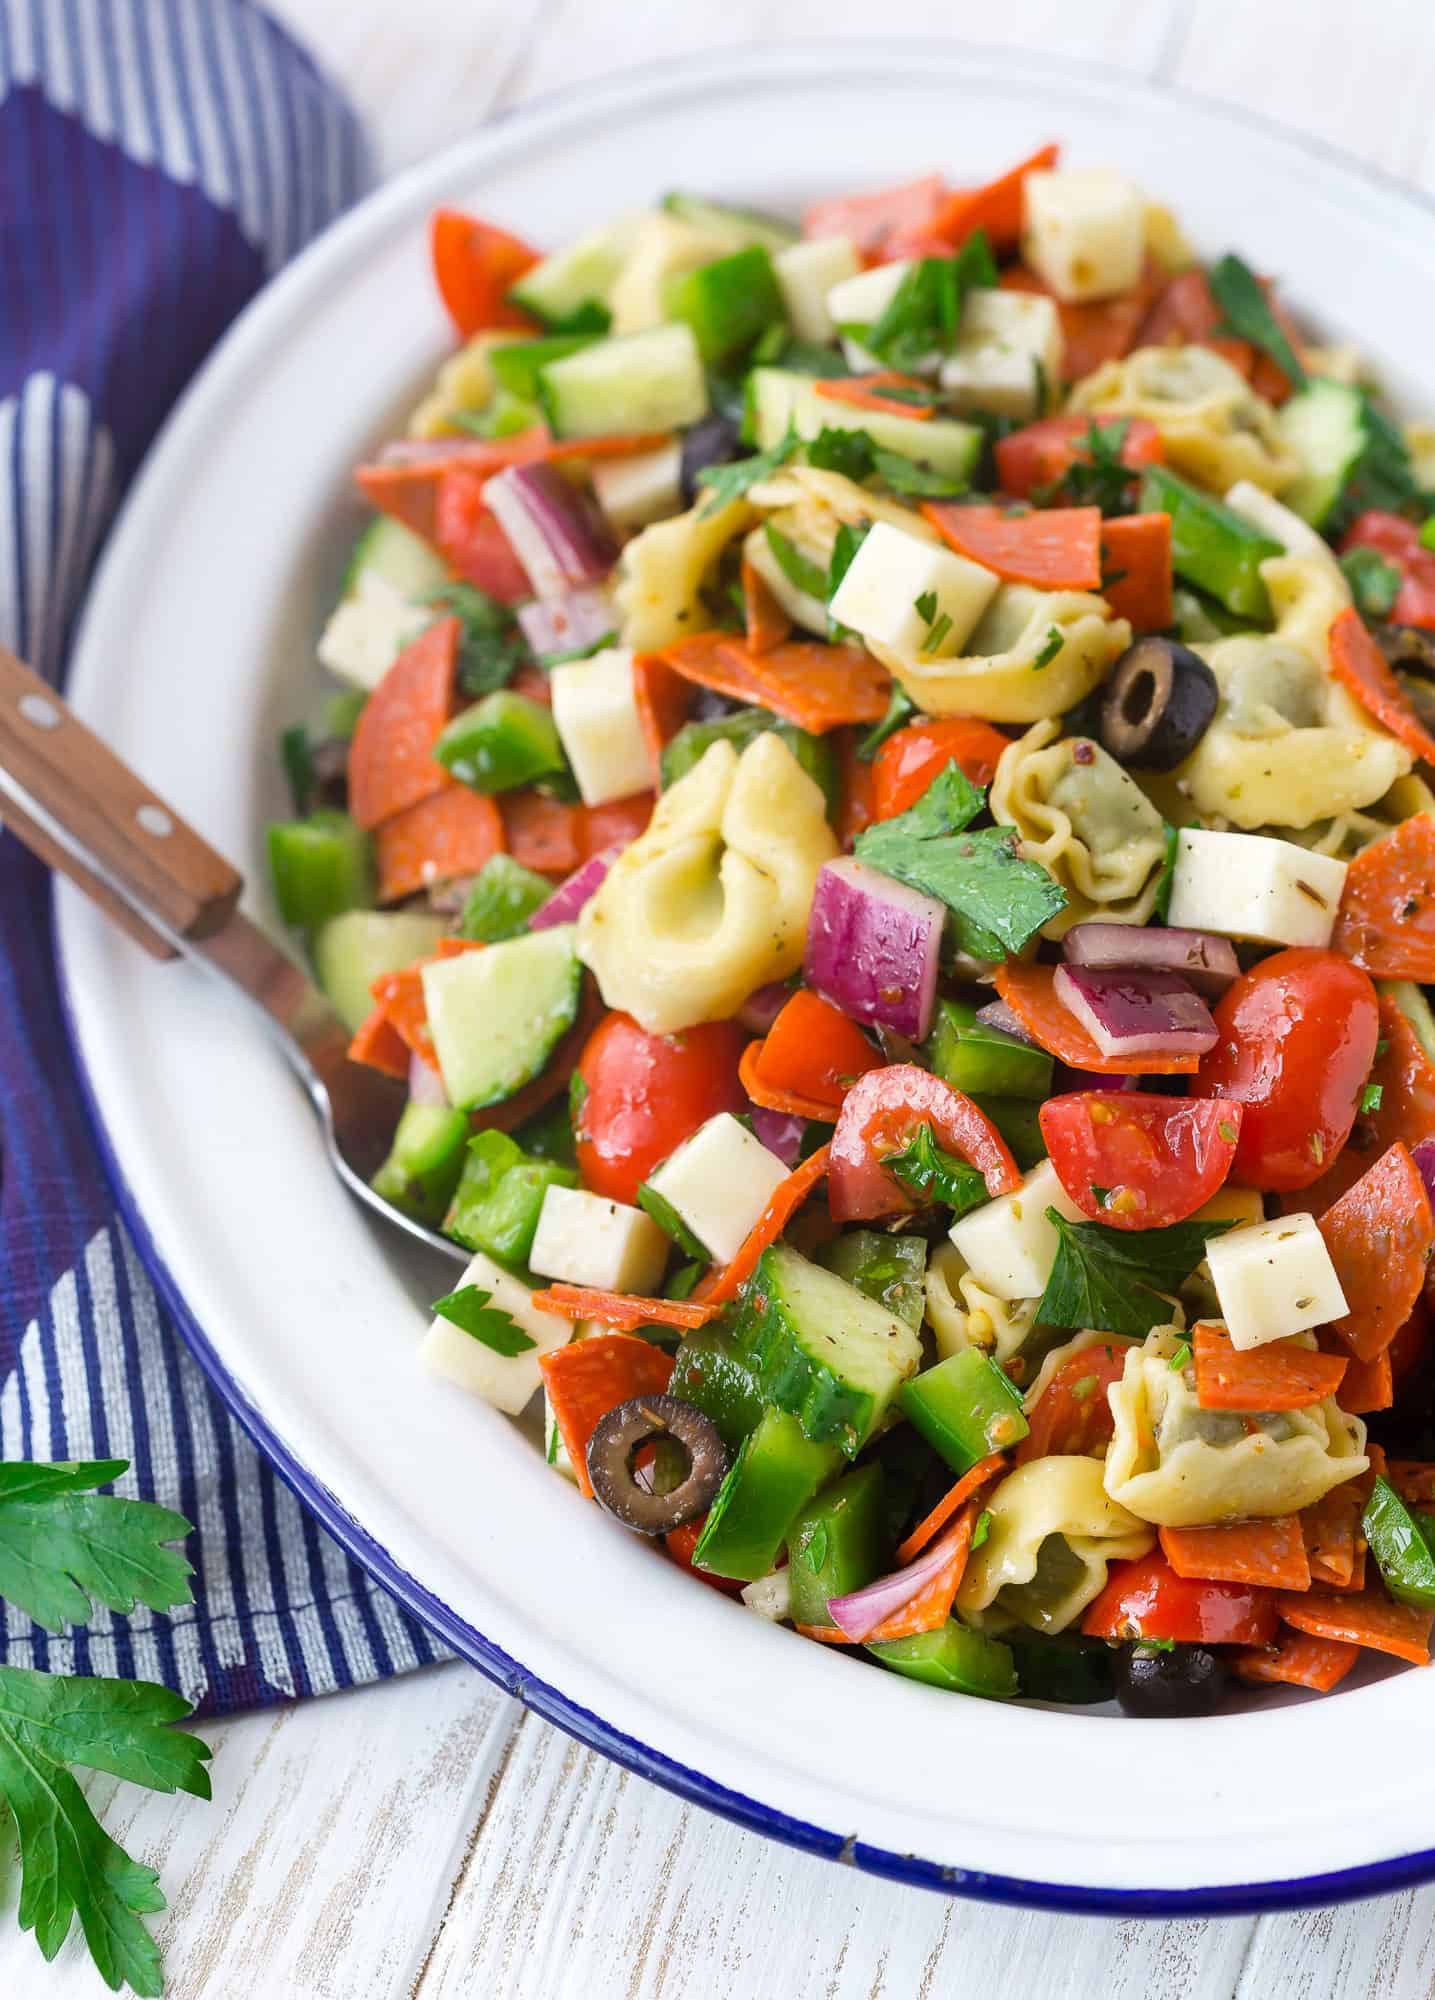 Pasta salad with olives, tortellini, cucumbers, pepperoni, and more.